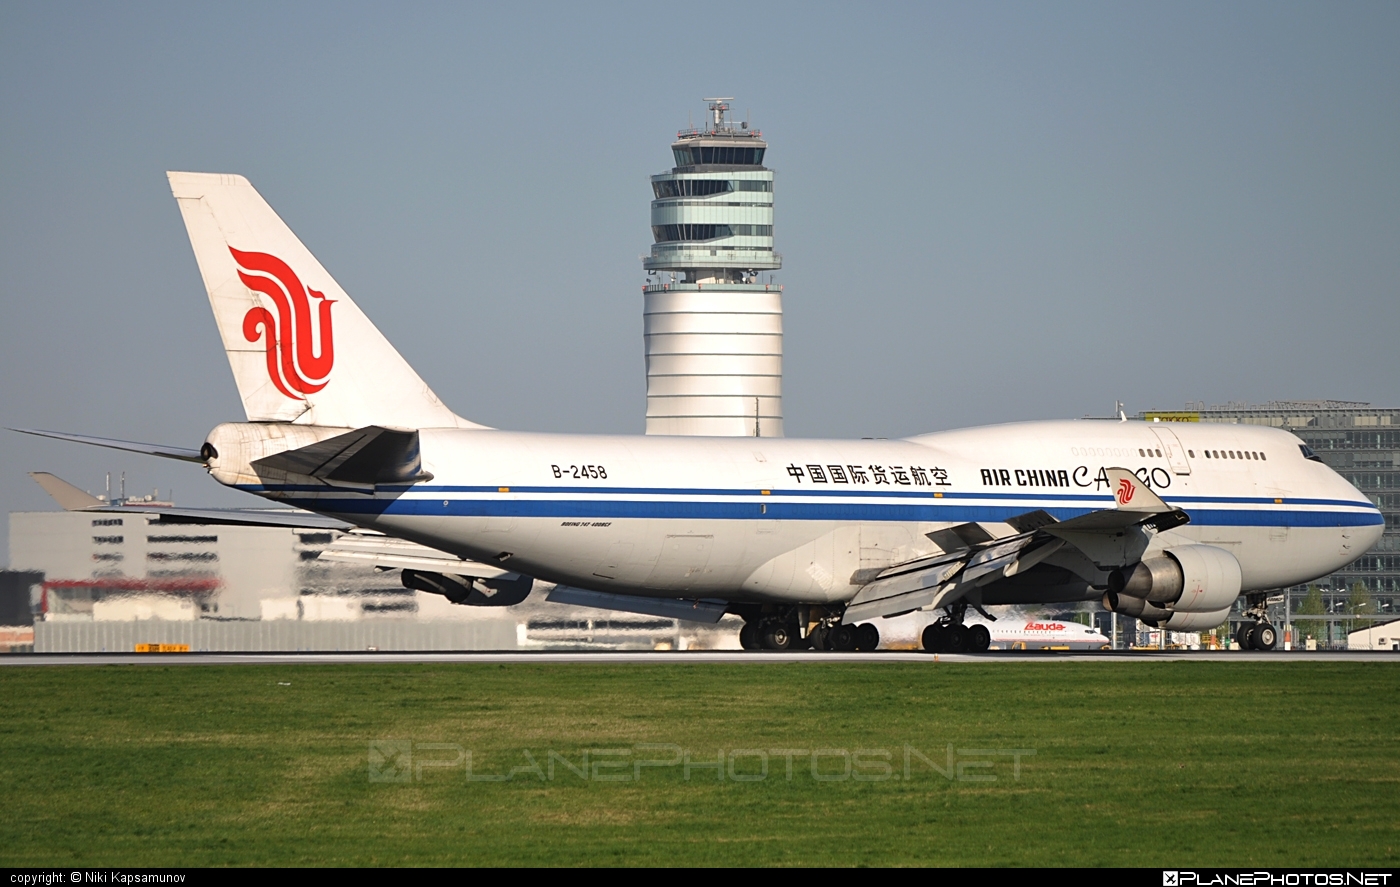 Boeing 747-400BCF - B-2458 operated by Air China Cargo #airchina #airchinacargo #b747 #b747bcf #boeing #boeing747 #boeingconvertedfreighter #jumbo